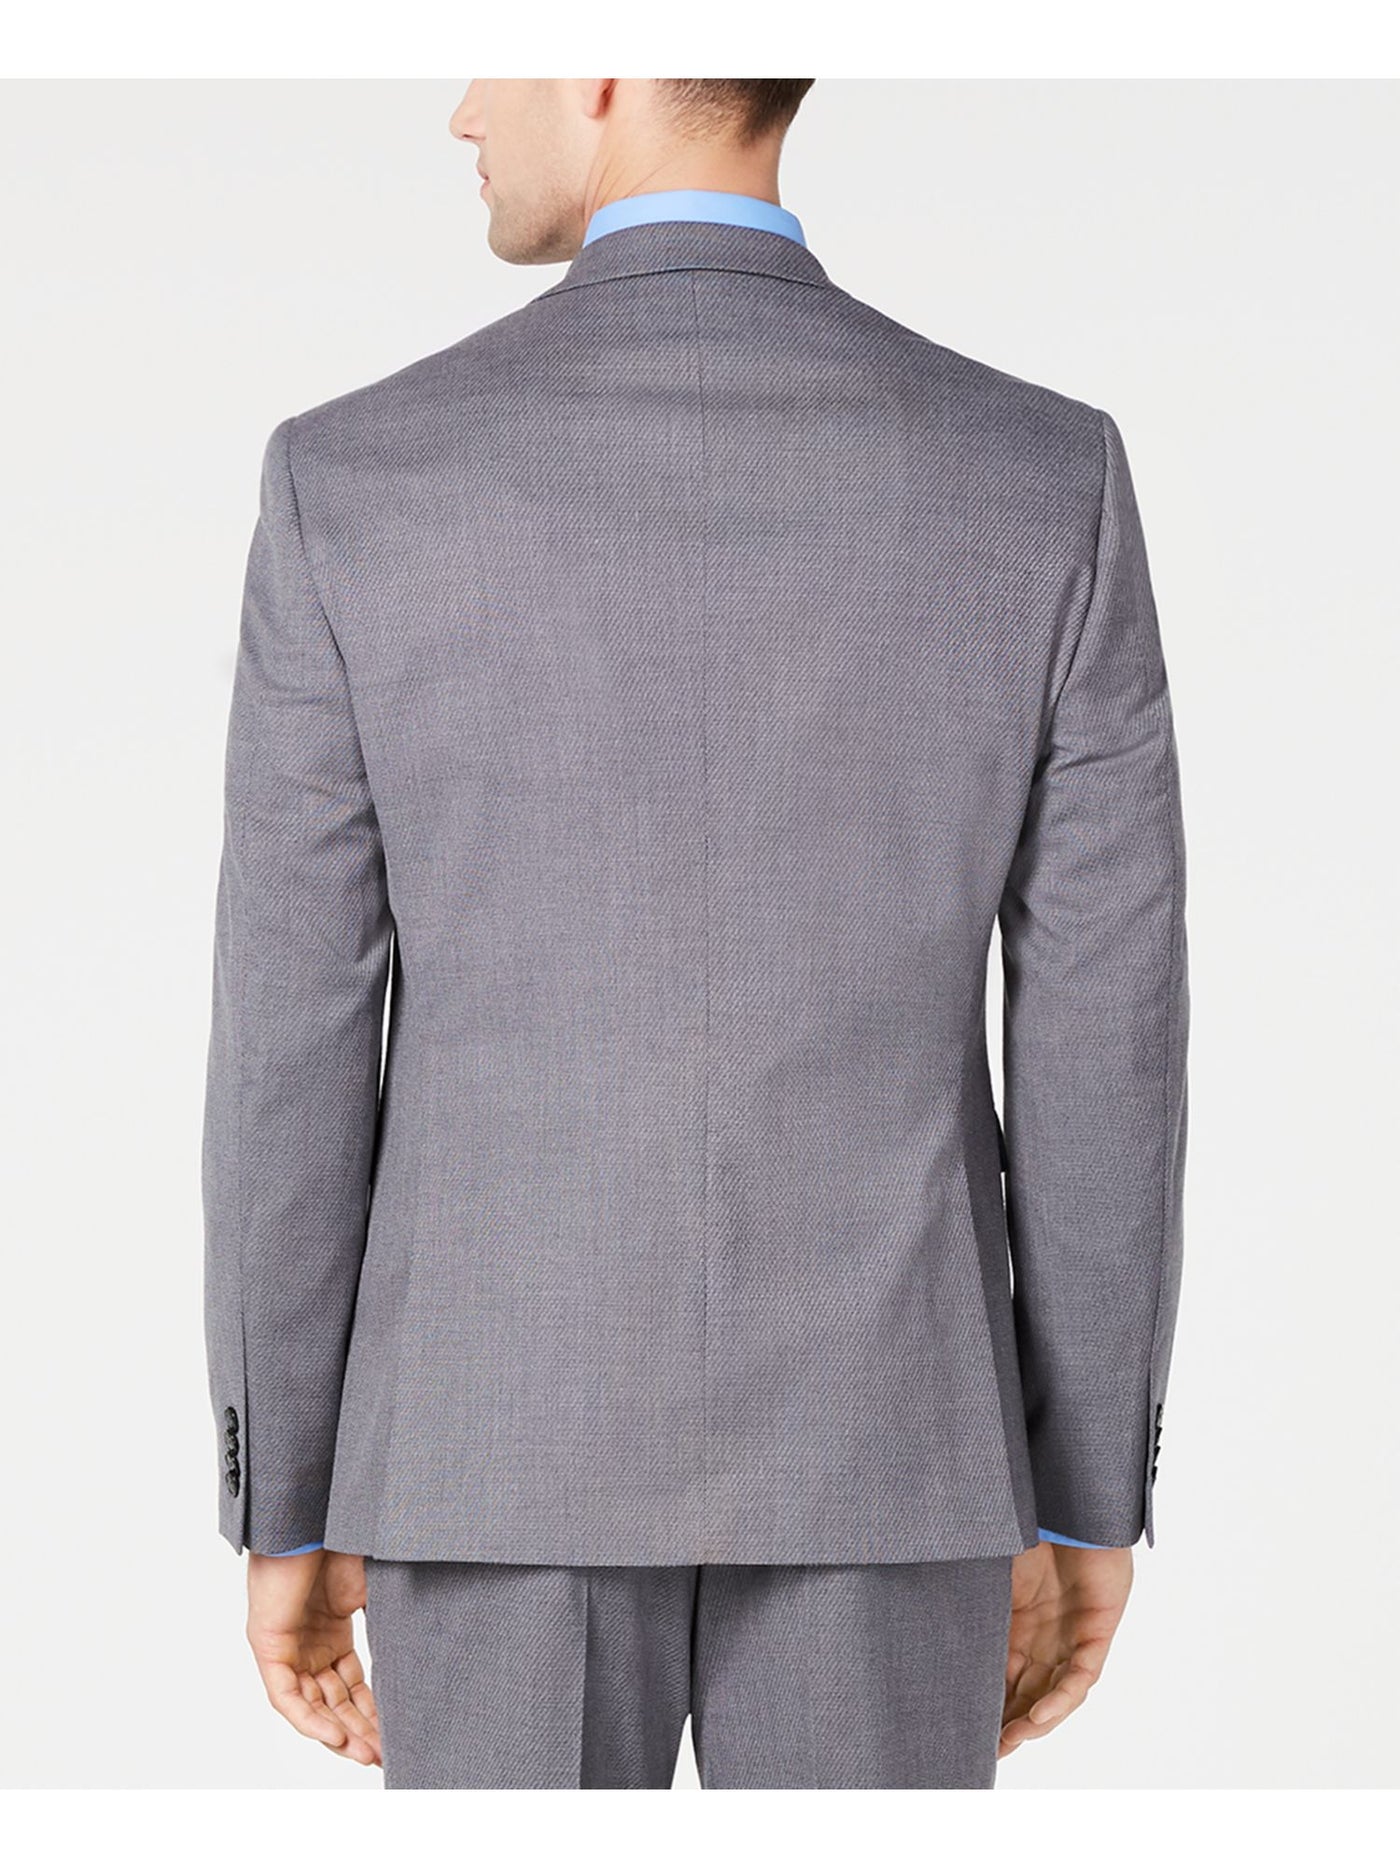 VINCE CAMUTO Mens Gray Single Breasted, Stretch, Slim Fit Wrinkle Resistant Suit Separate Blazer Jacket 40L